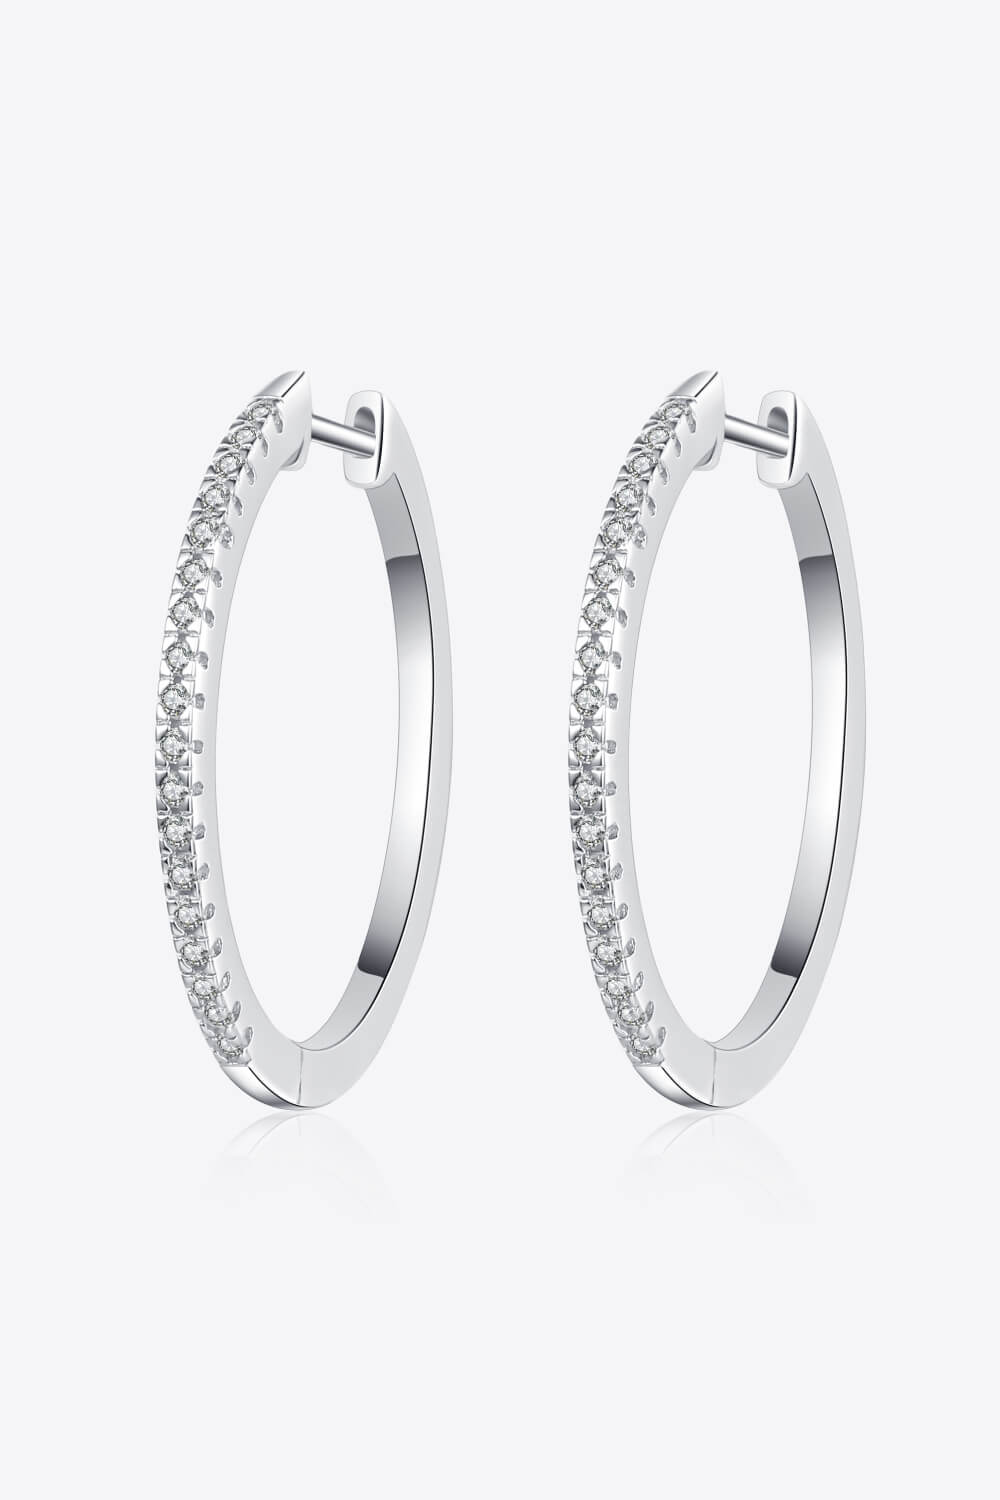 Rhodium-Plated Moissanite Hoop Earrings-Earrings-Inspired by Justeen-Women's Clothing Boutique in Chicago, Illinois